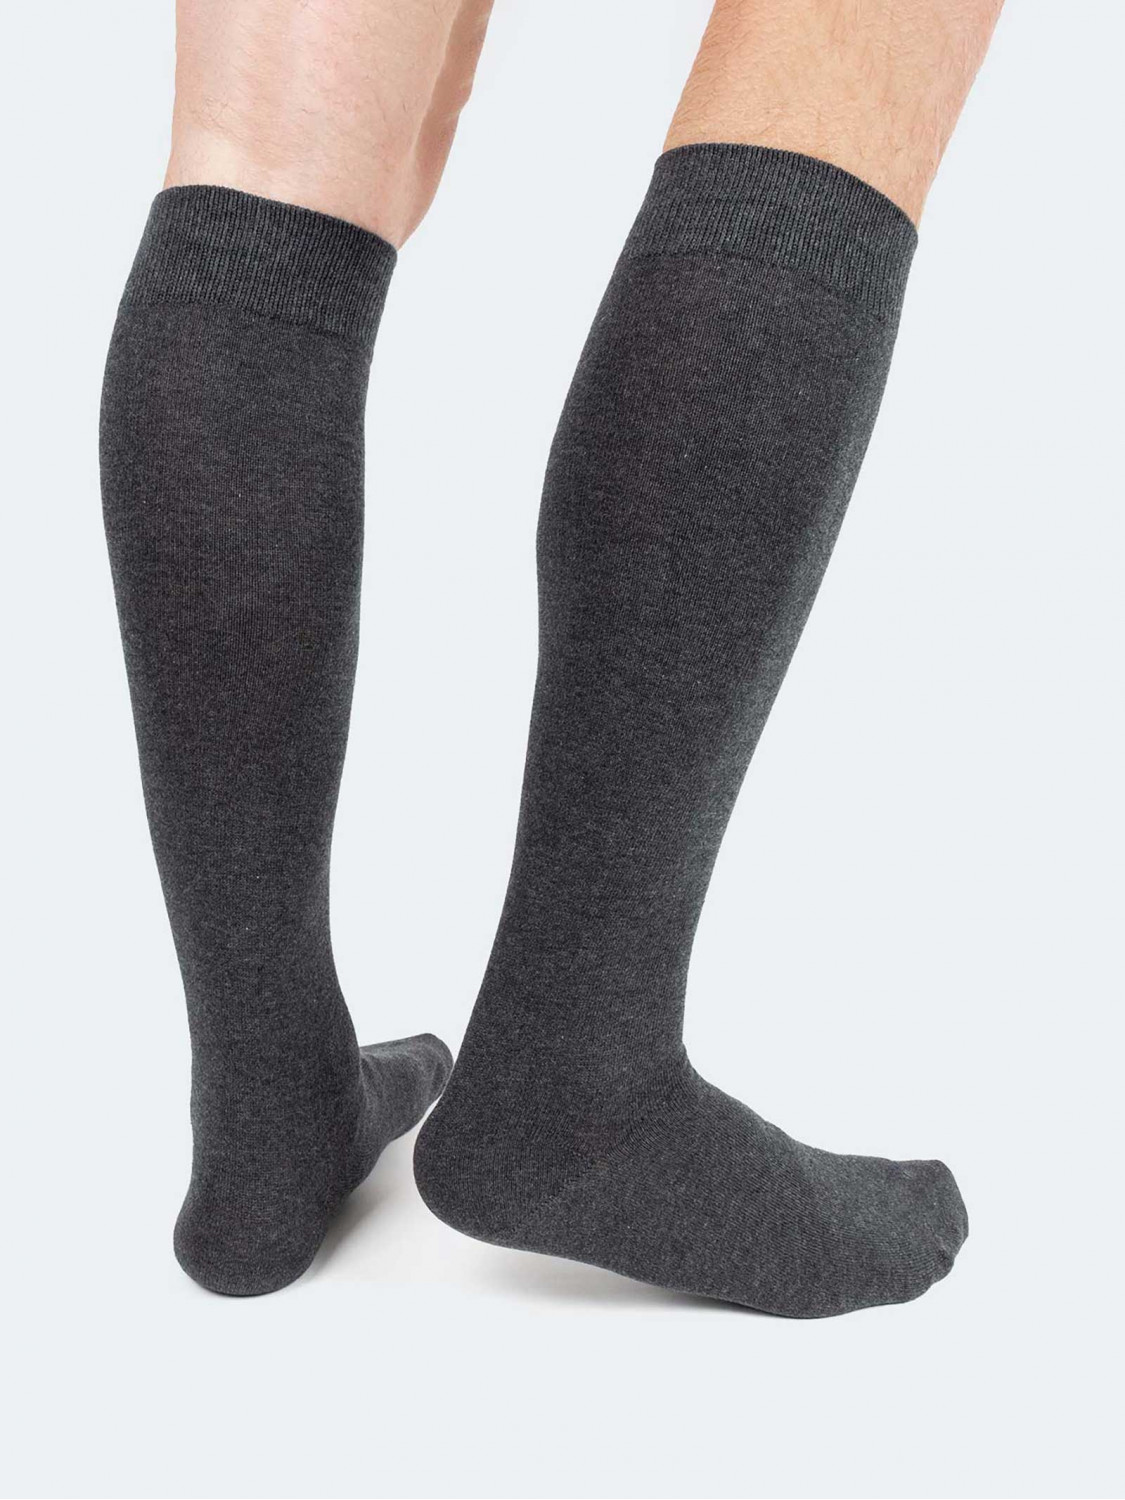 Knee high socks in Warm Twisted Cotton - 6 Pairs